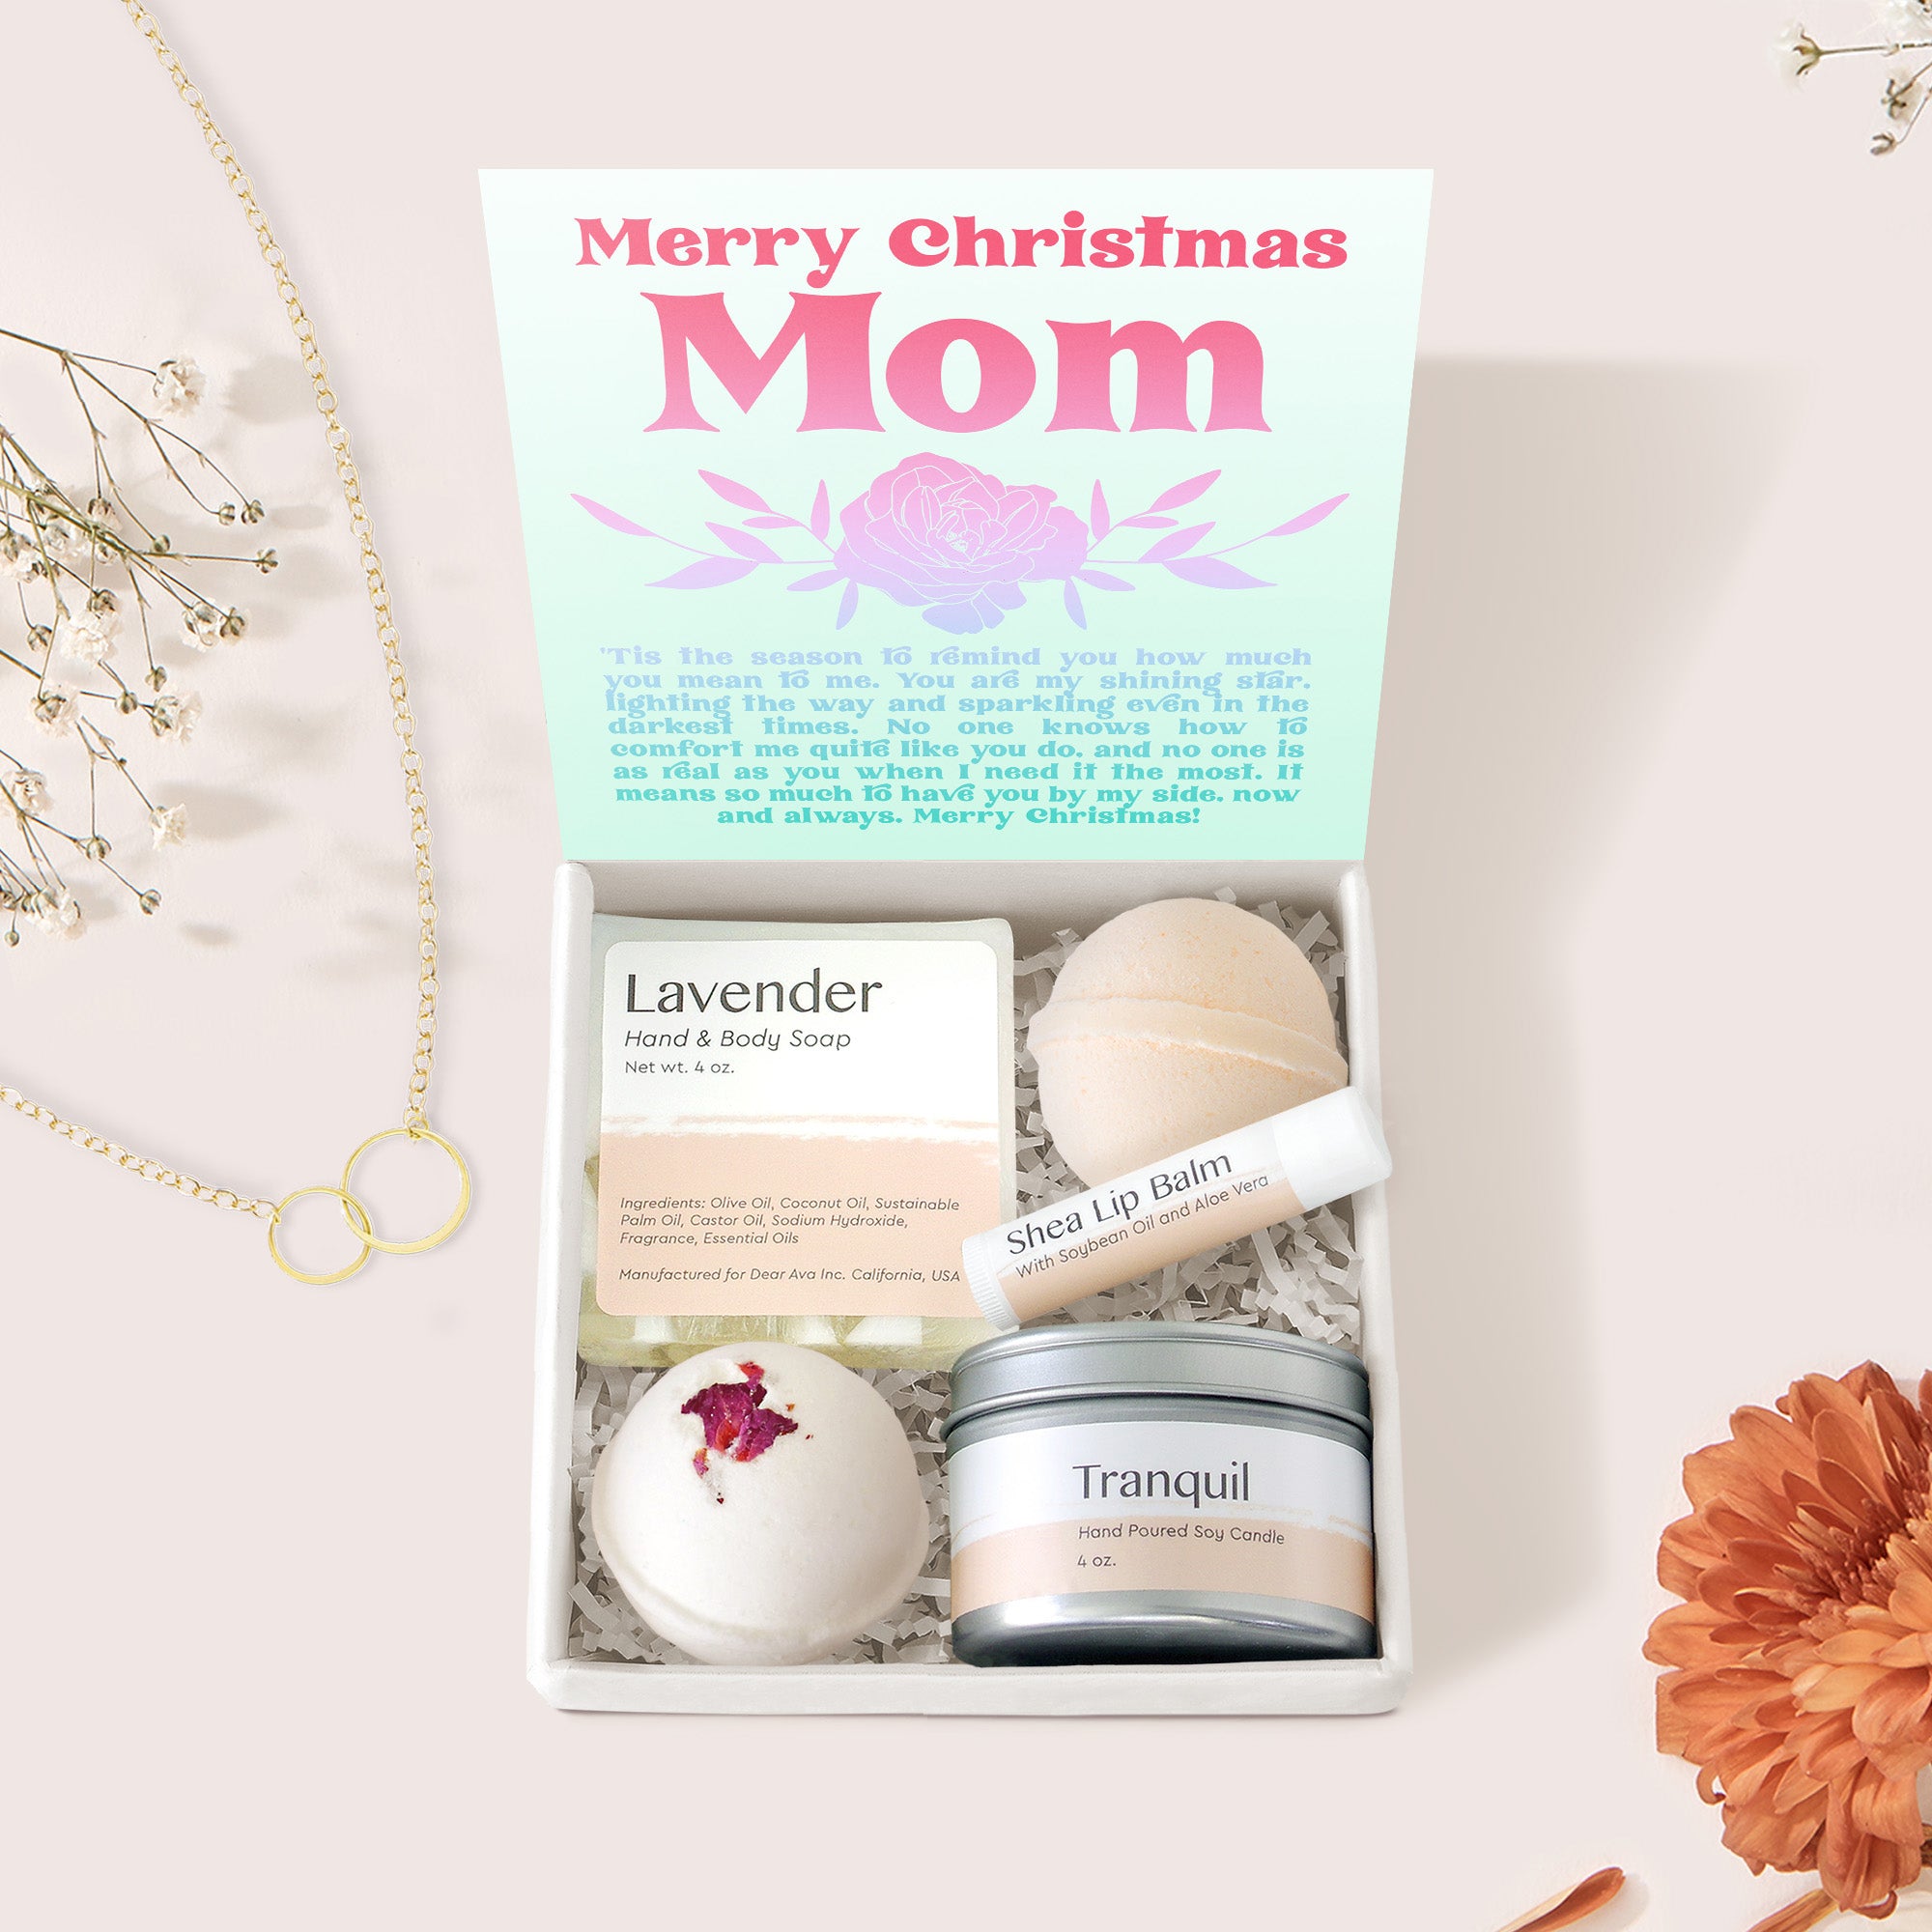 15 Gifts Moms REALLY Want This Christmas